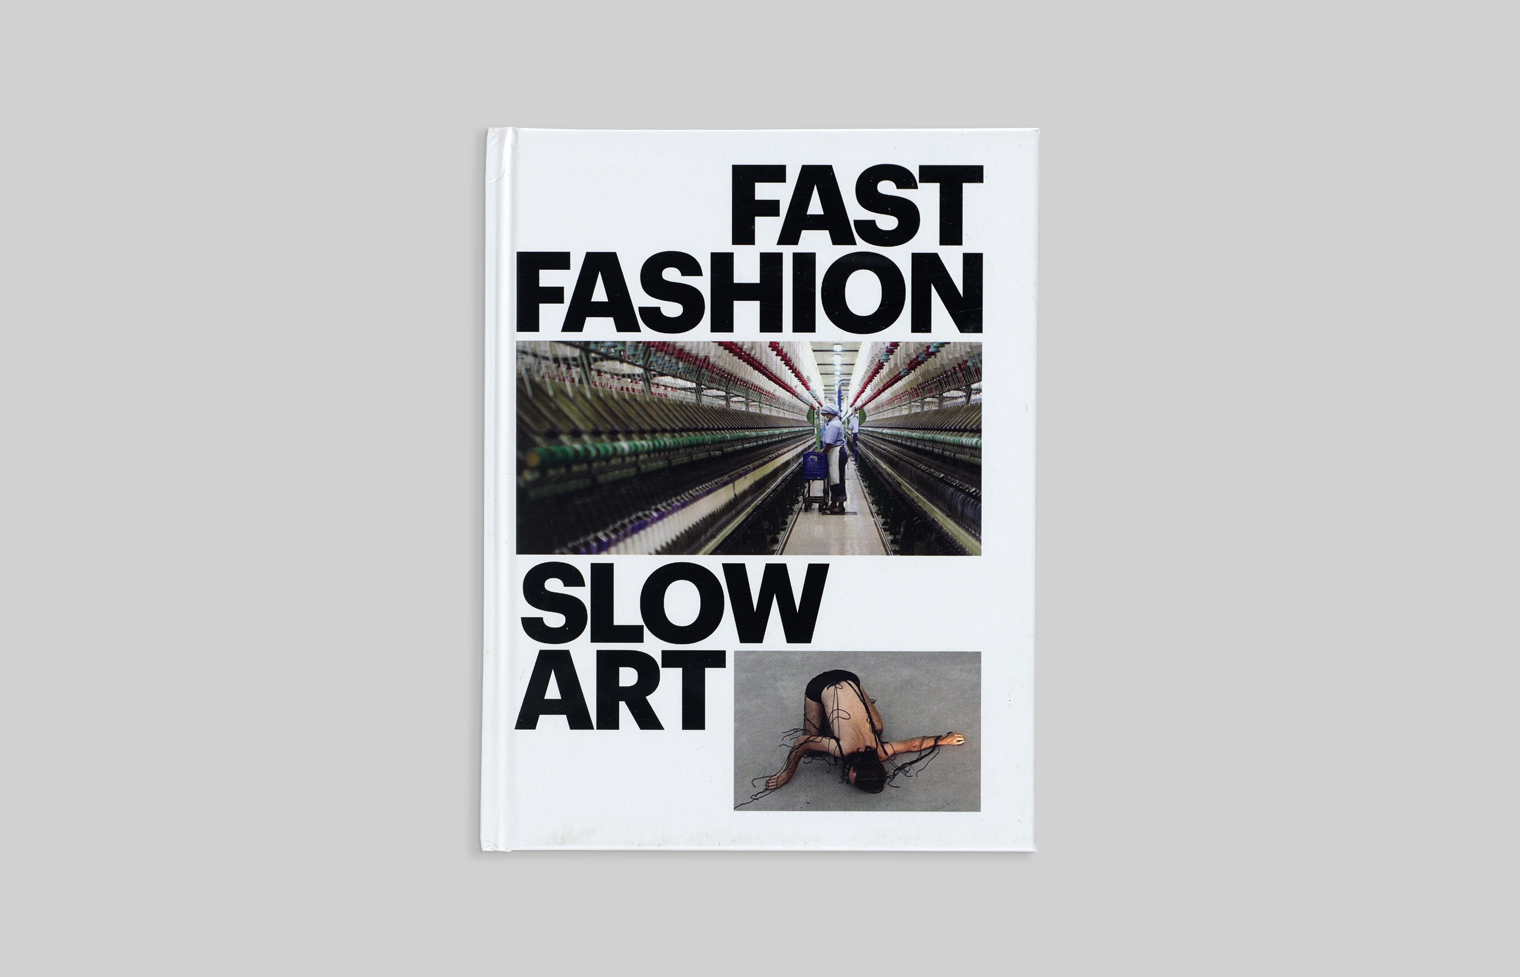 The cover juxtaposes a factory scene with a photo of performance art.